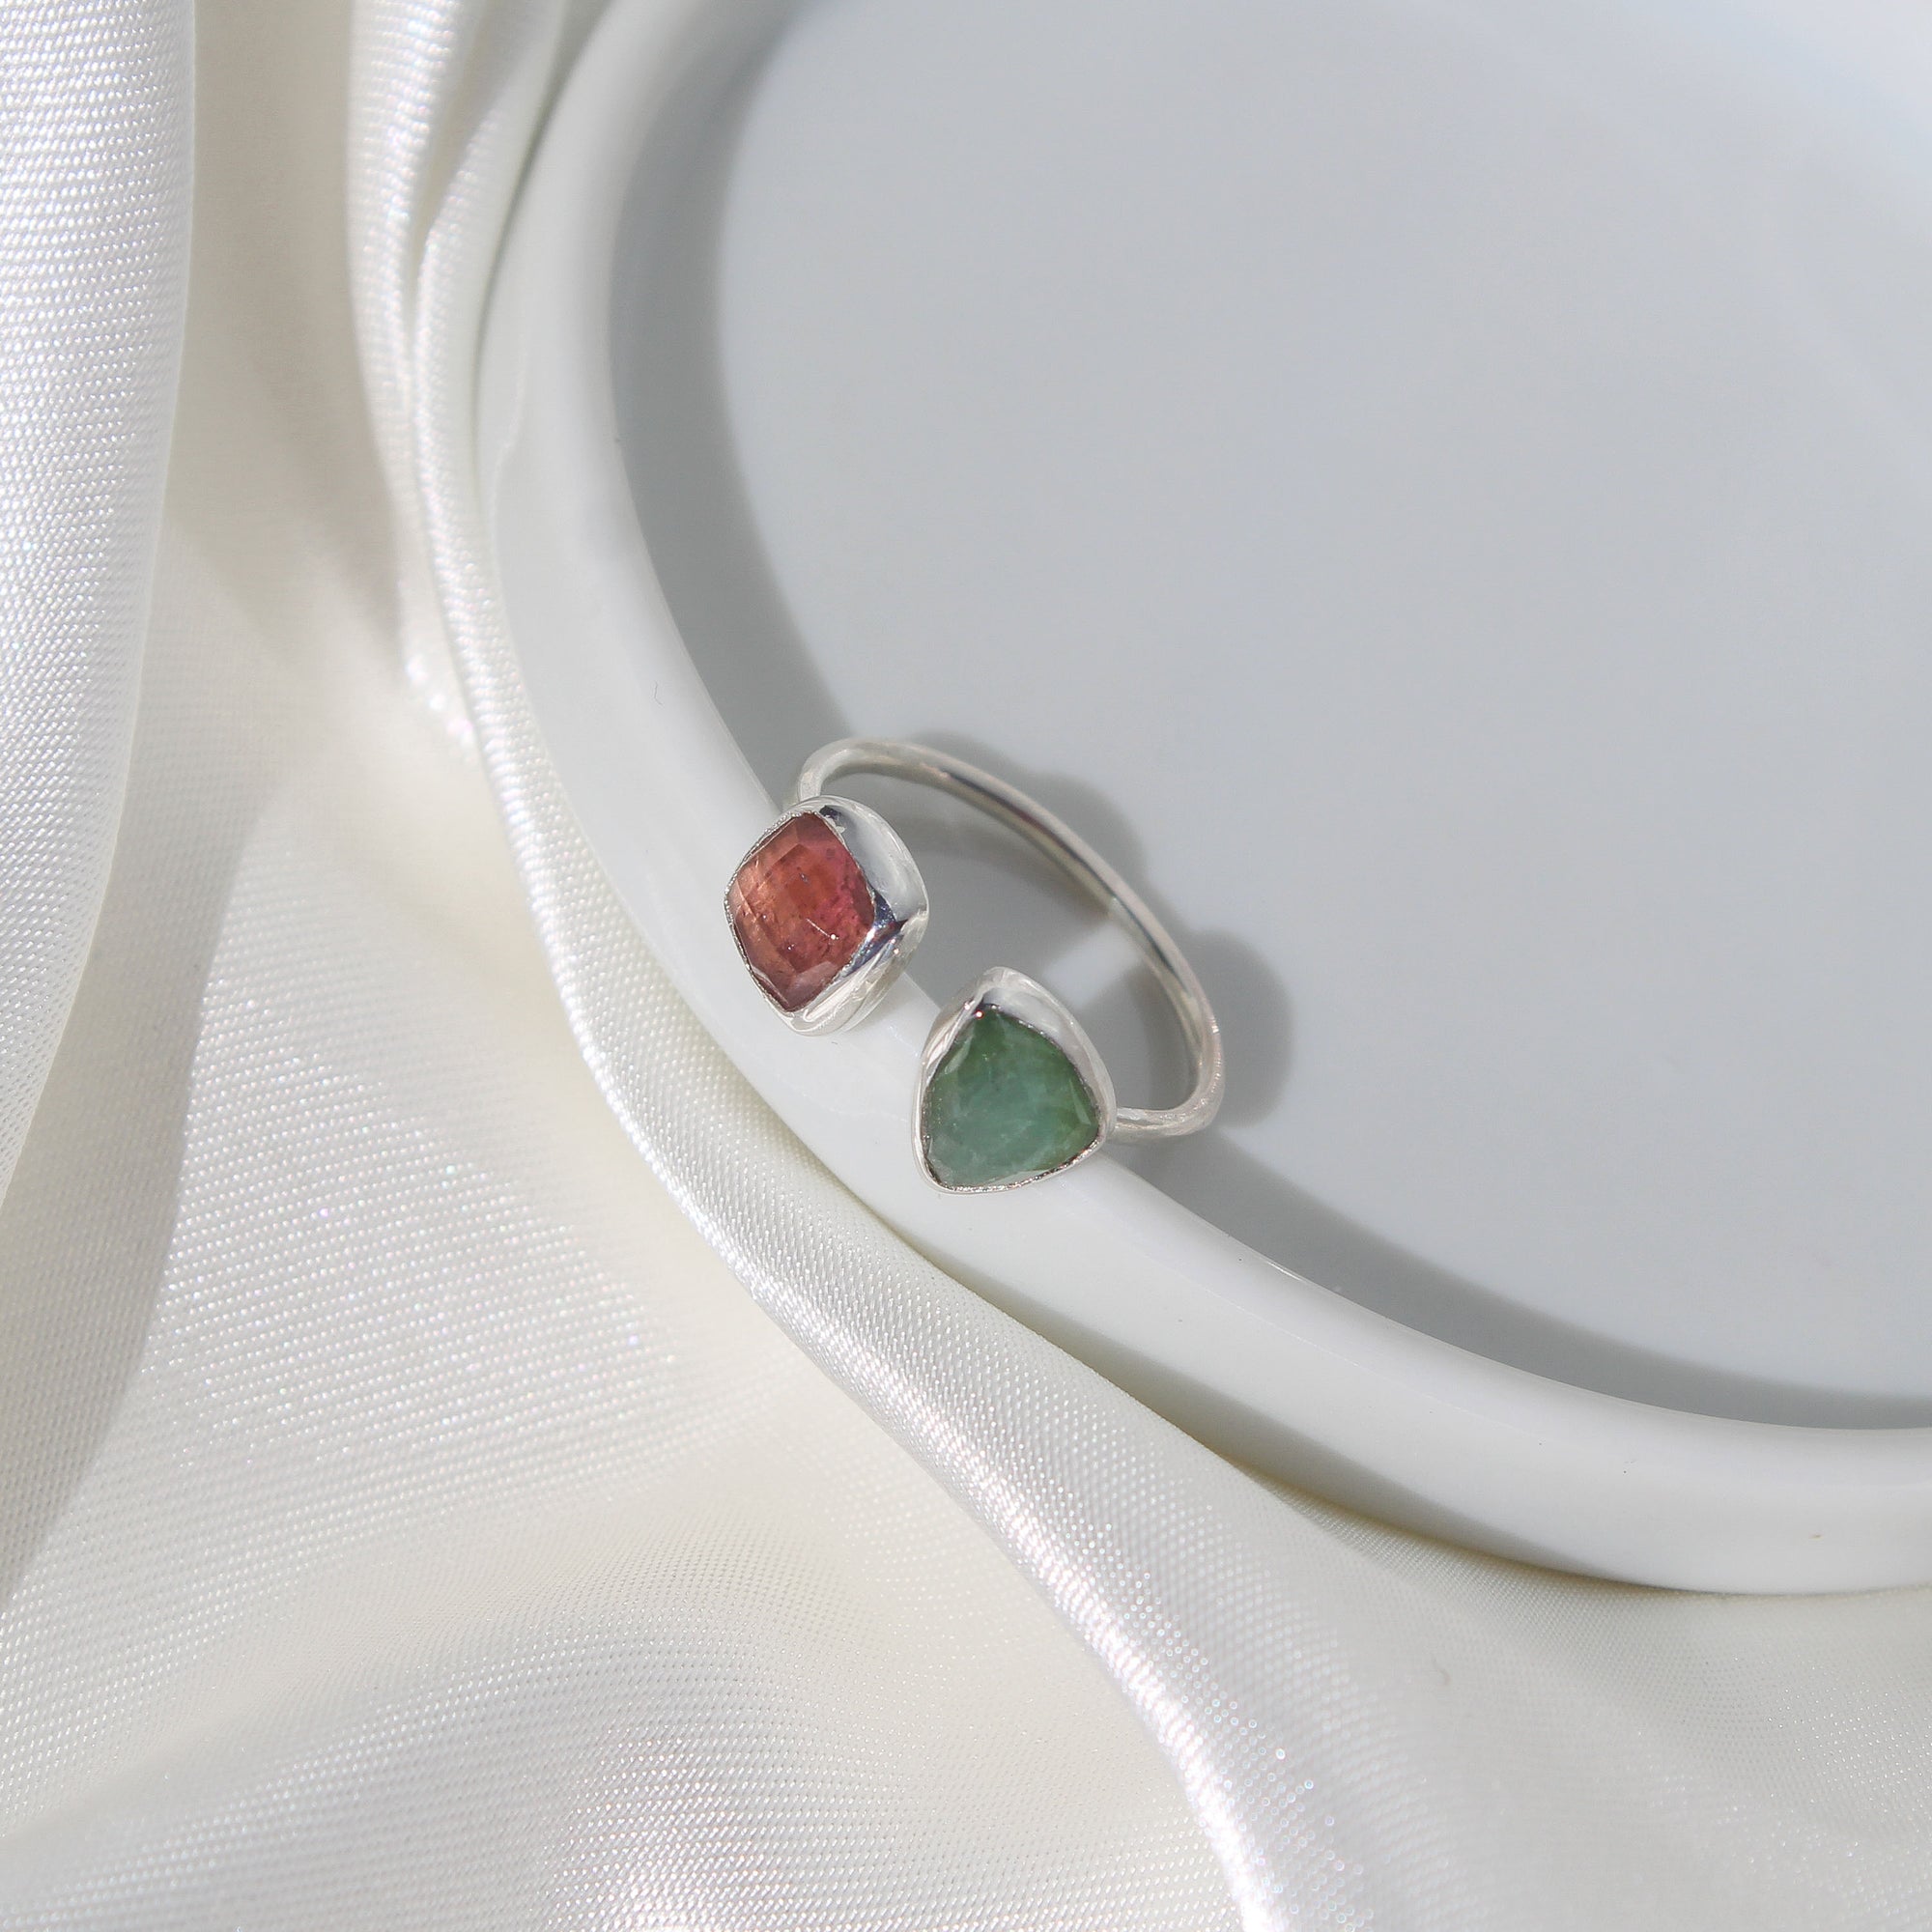 Pink and Green Tourmaline Adjustable Ring - Size 5